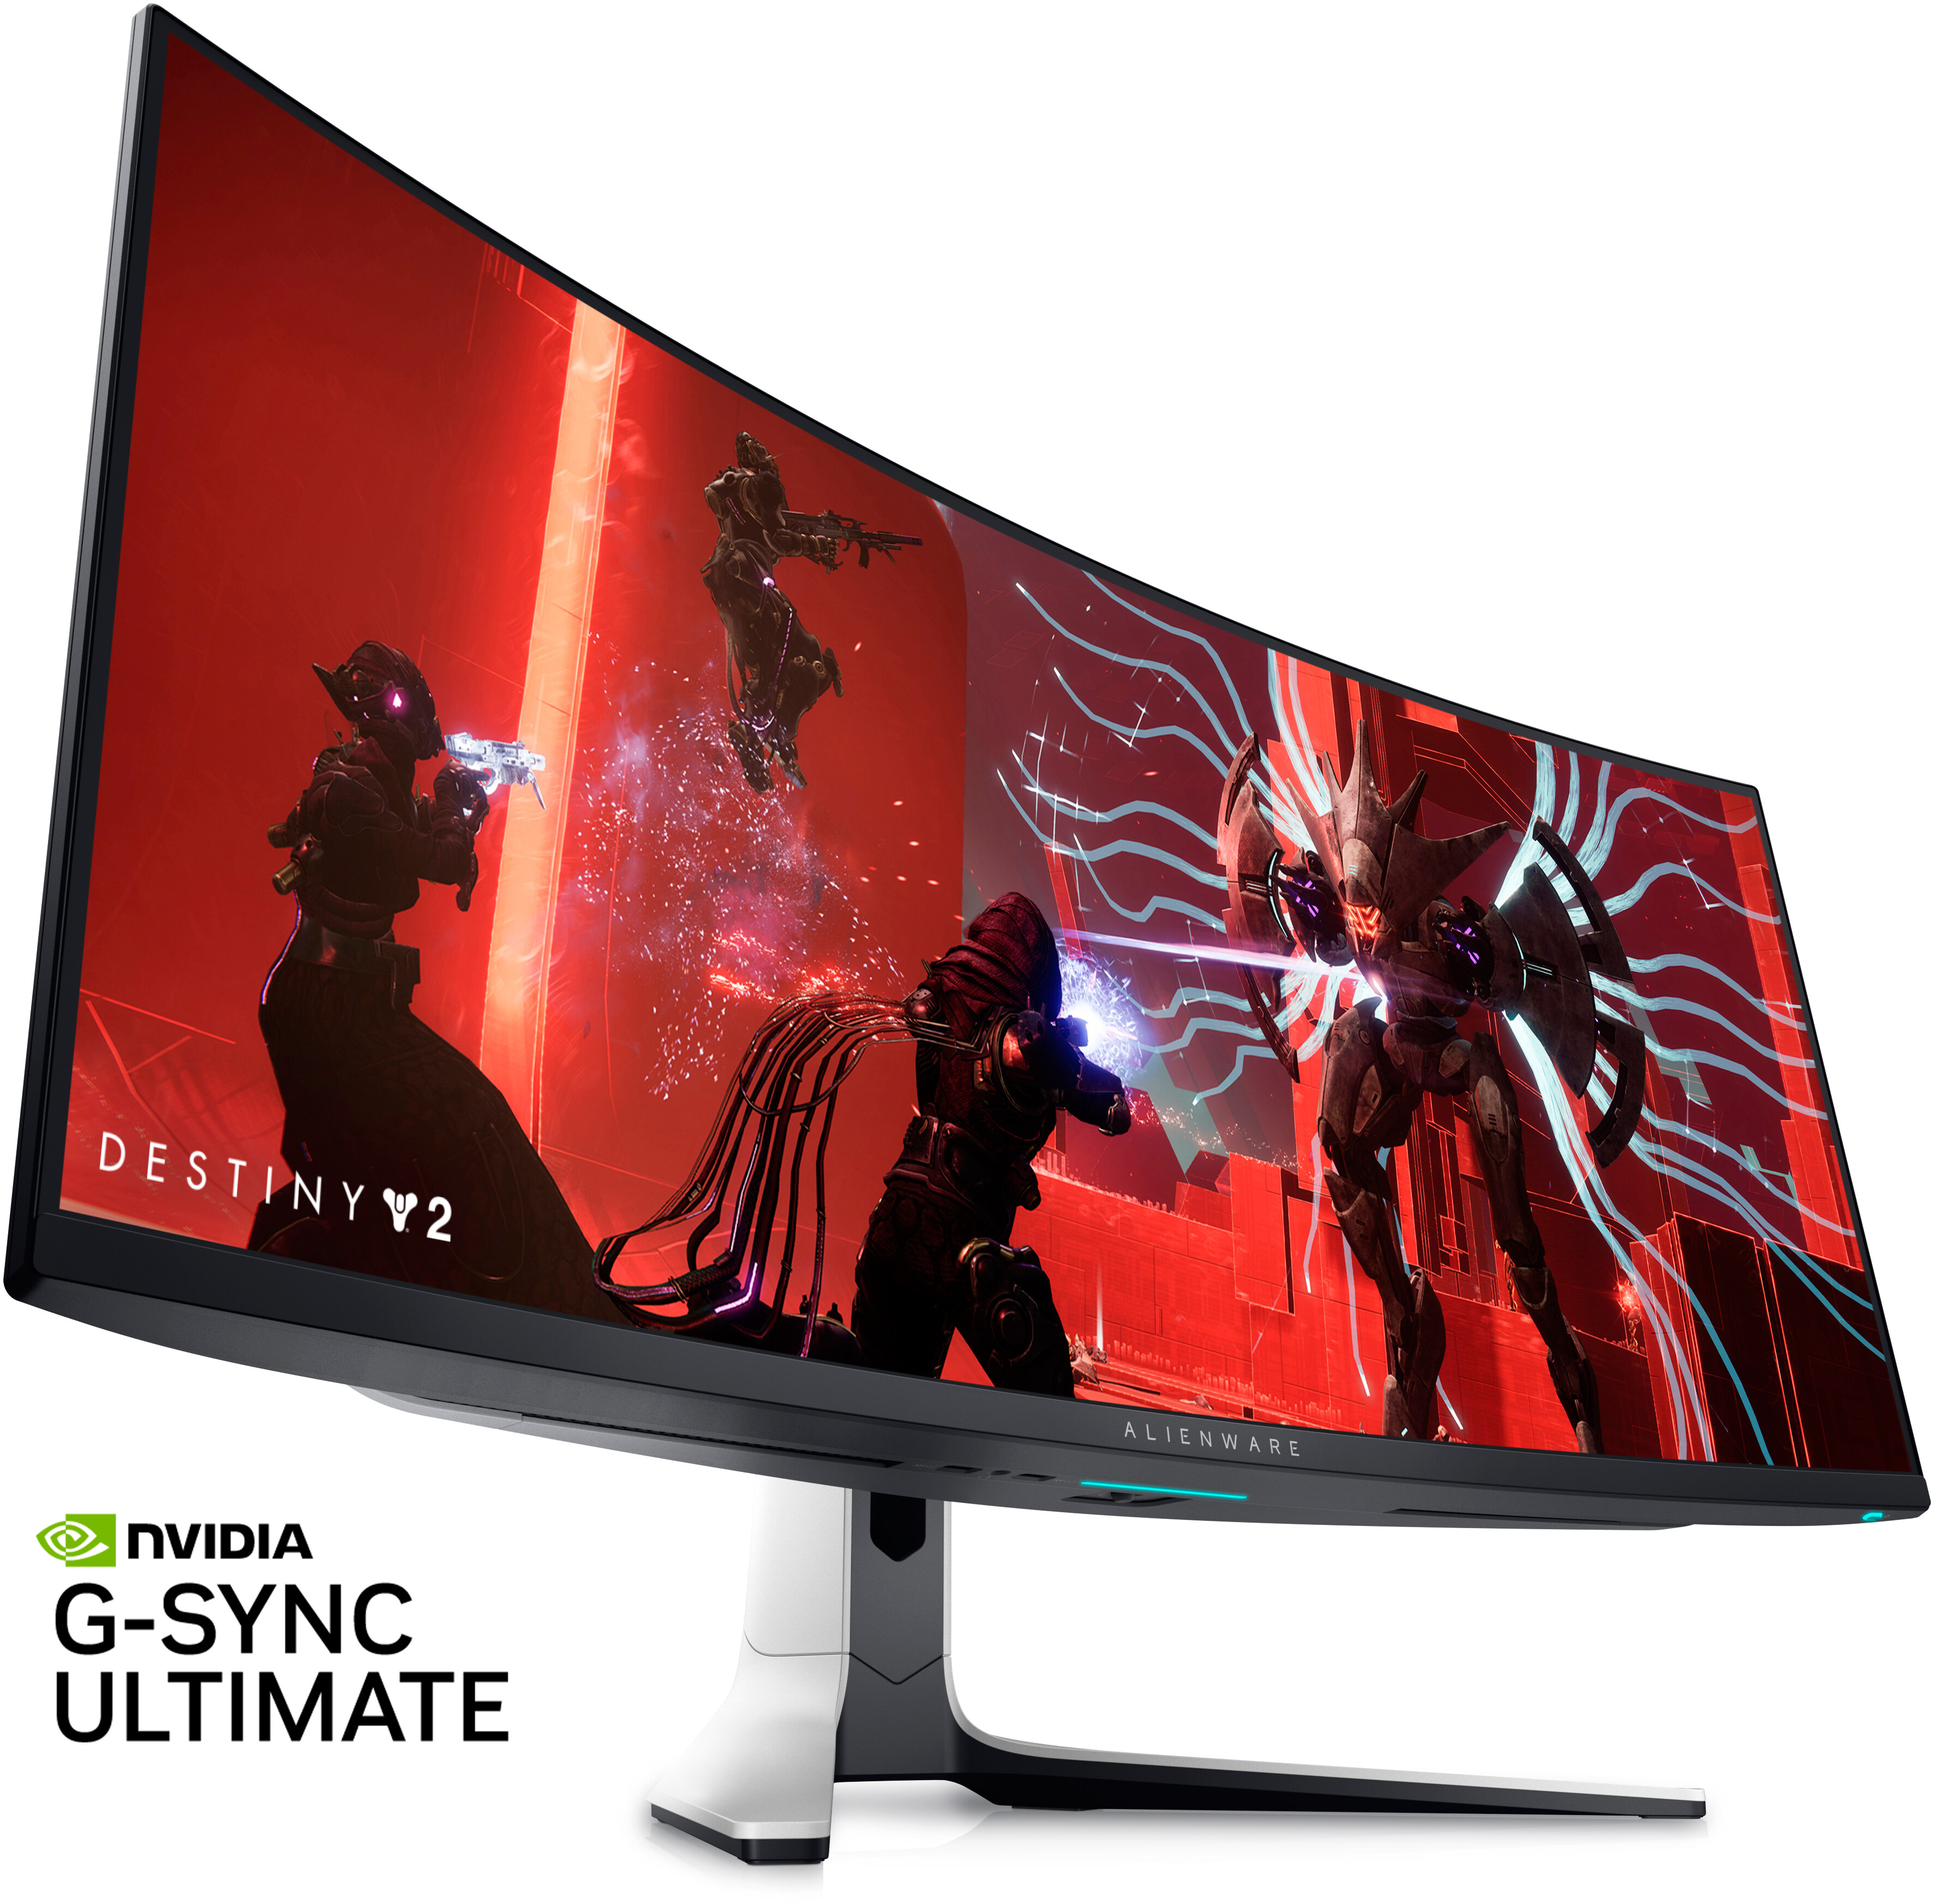 Alienware 34 Inch Curved QD-OLED Gaming Monitor - AW3423DW